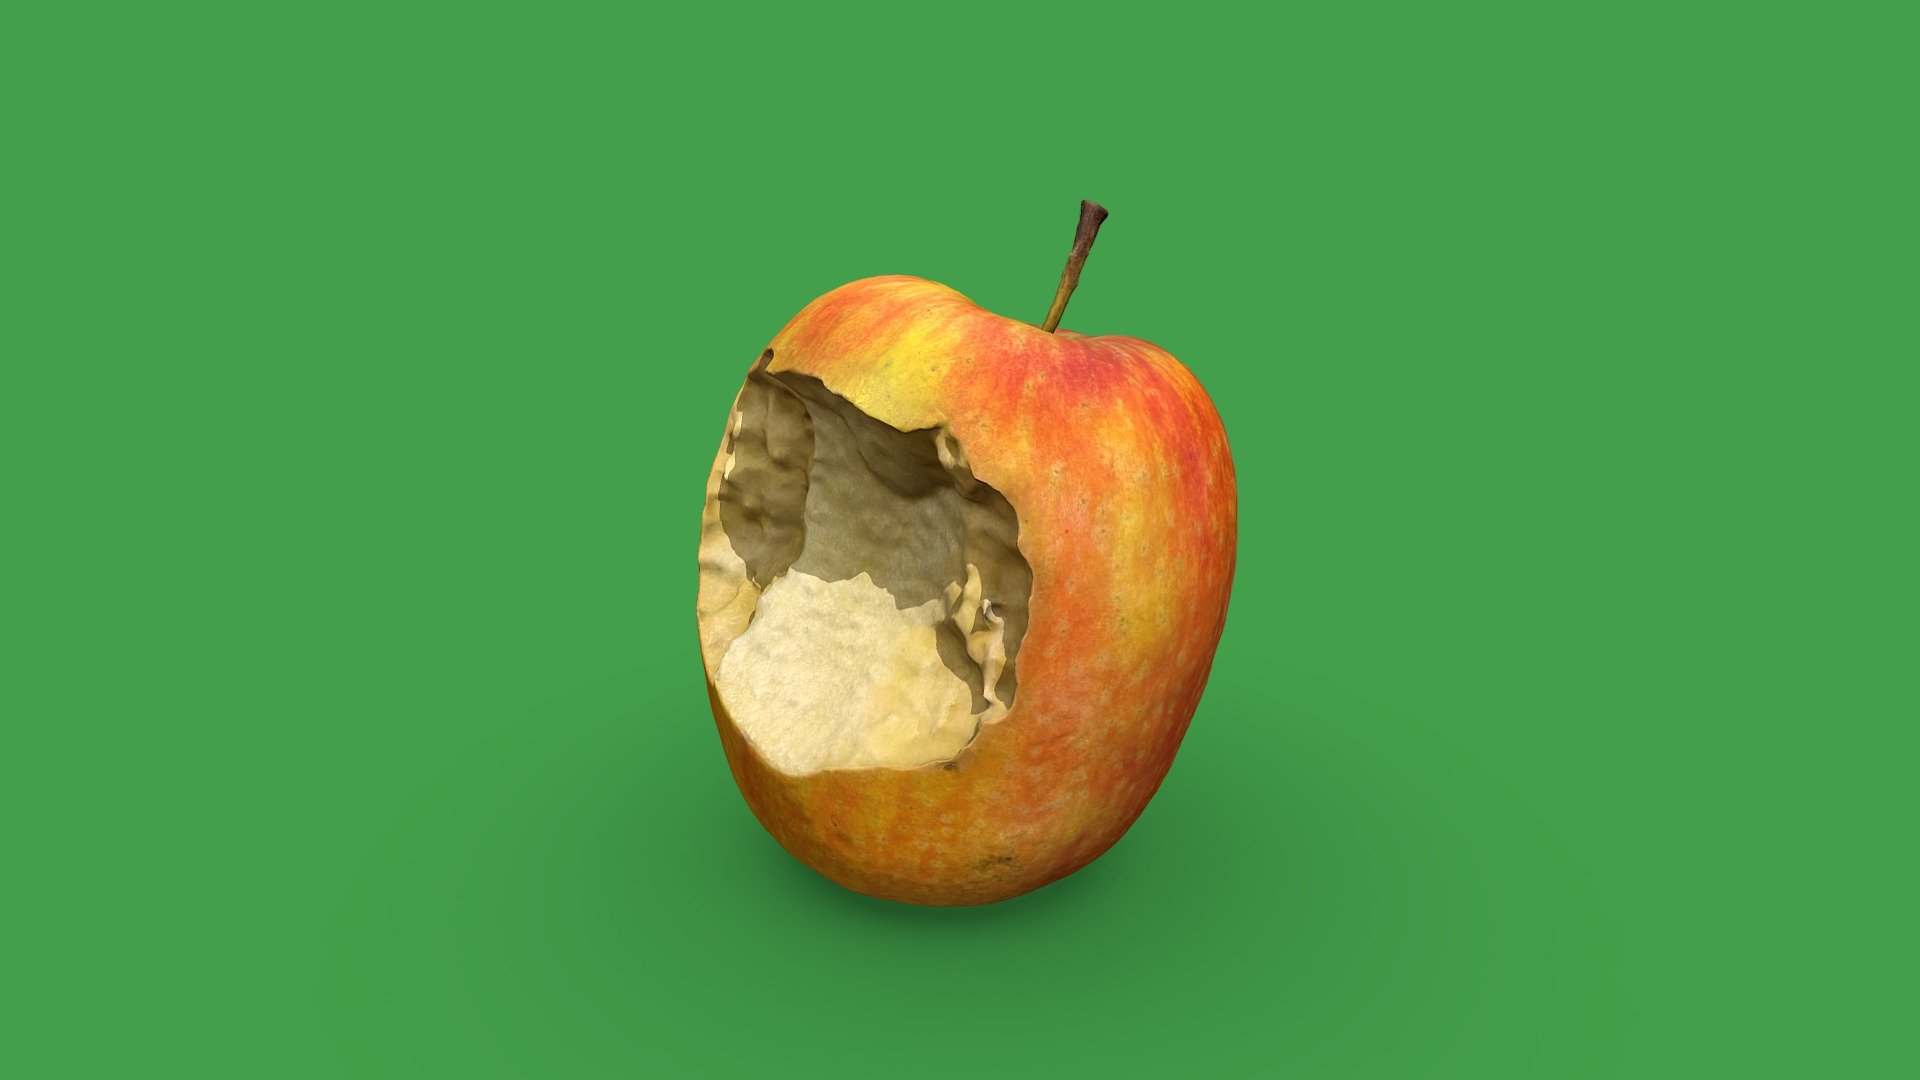 Photoscanned apple with a bite taken out of it. Use it with a standard license. Please see my other models of fruit and food on my profile 3d model